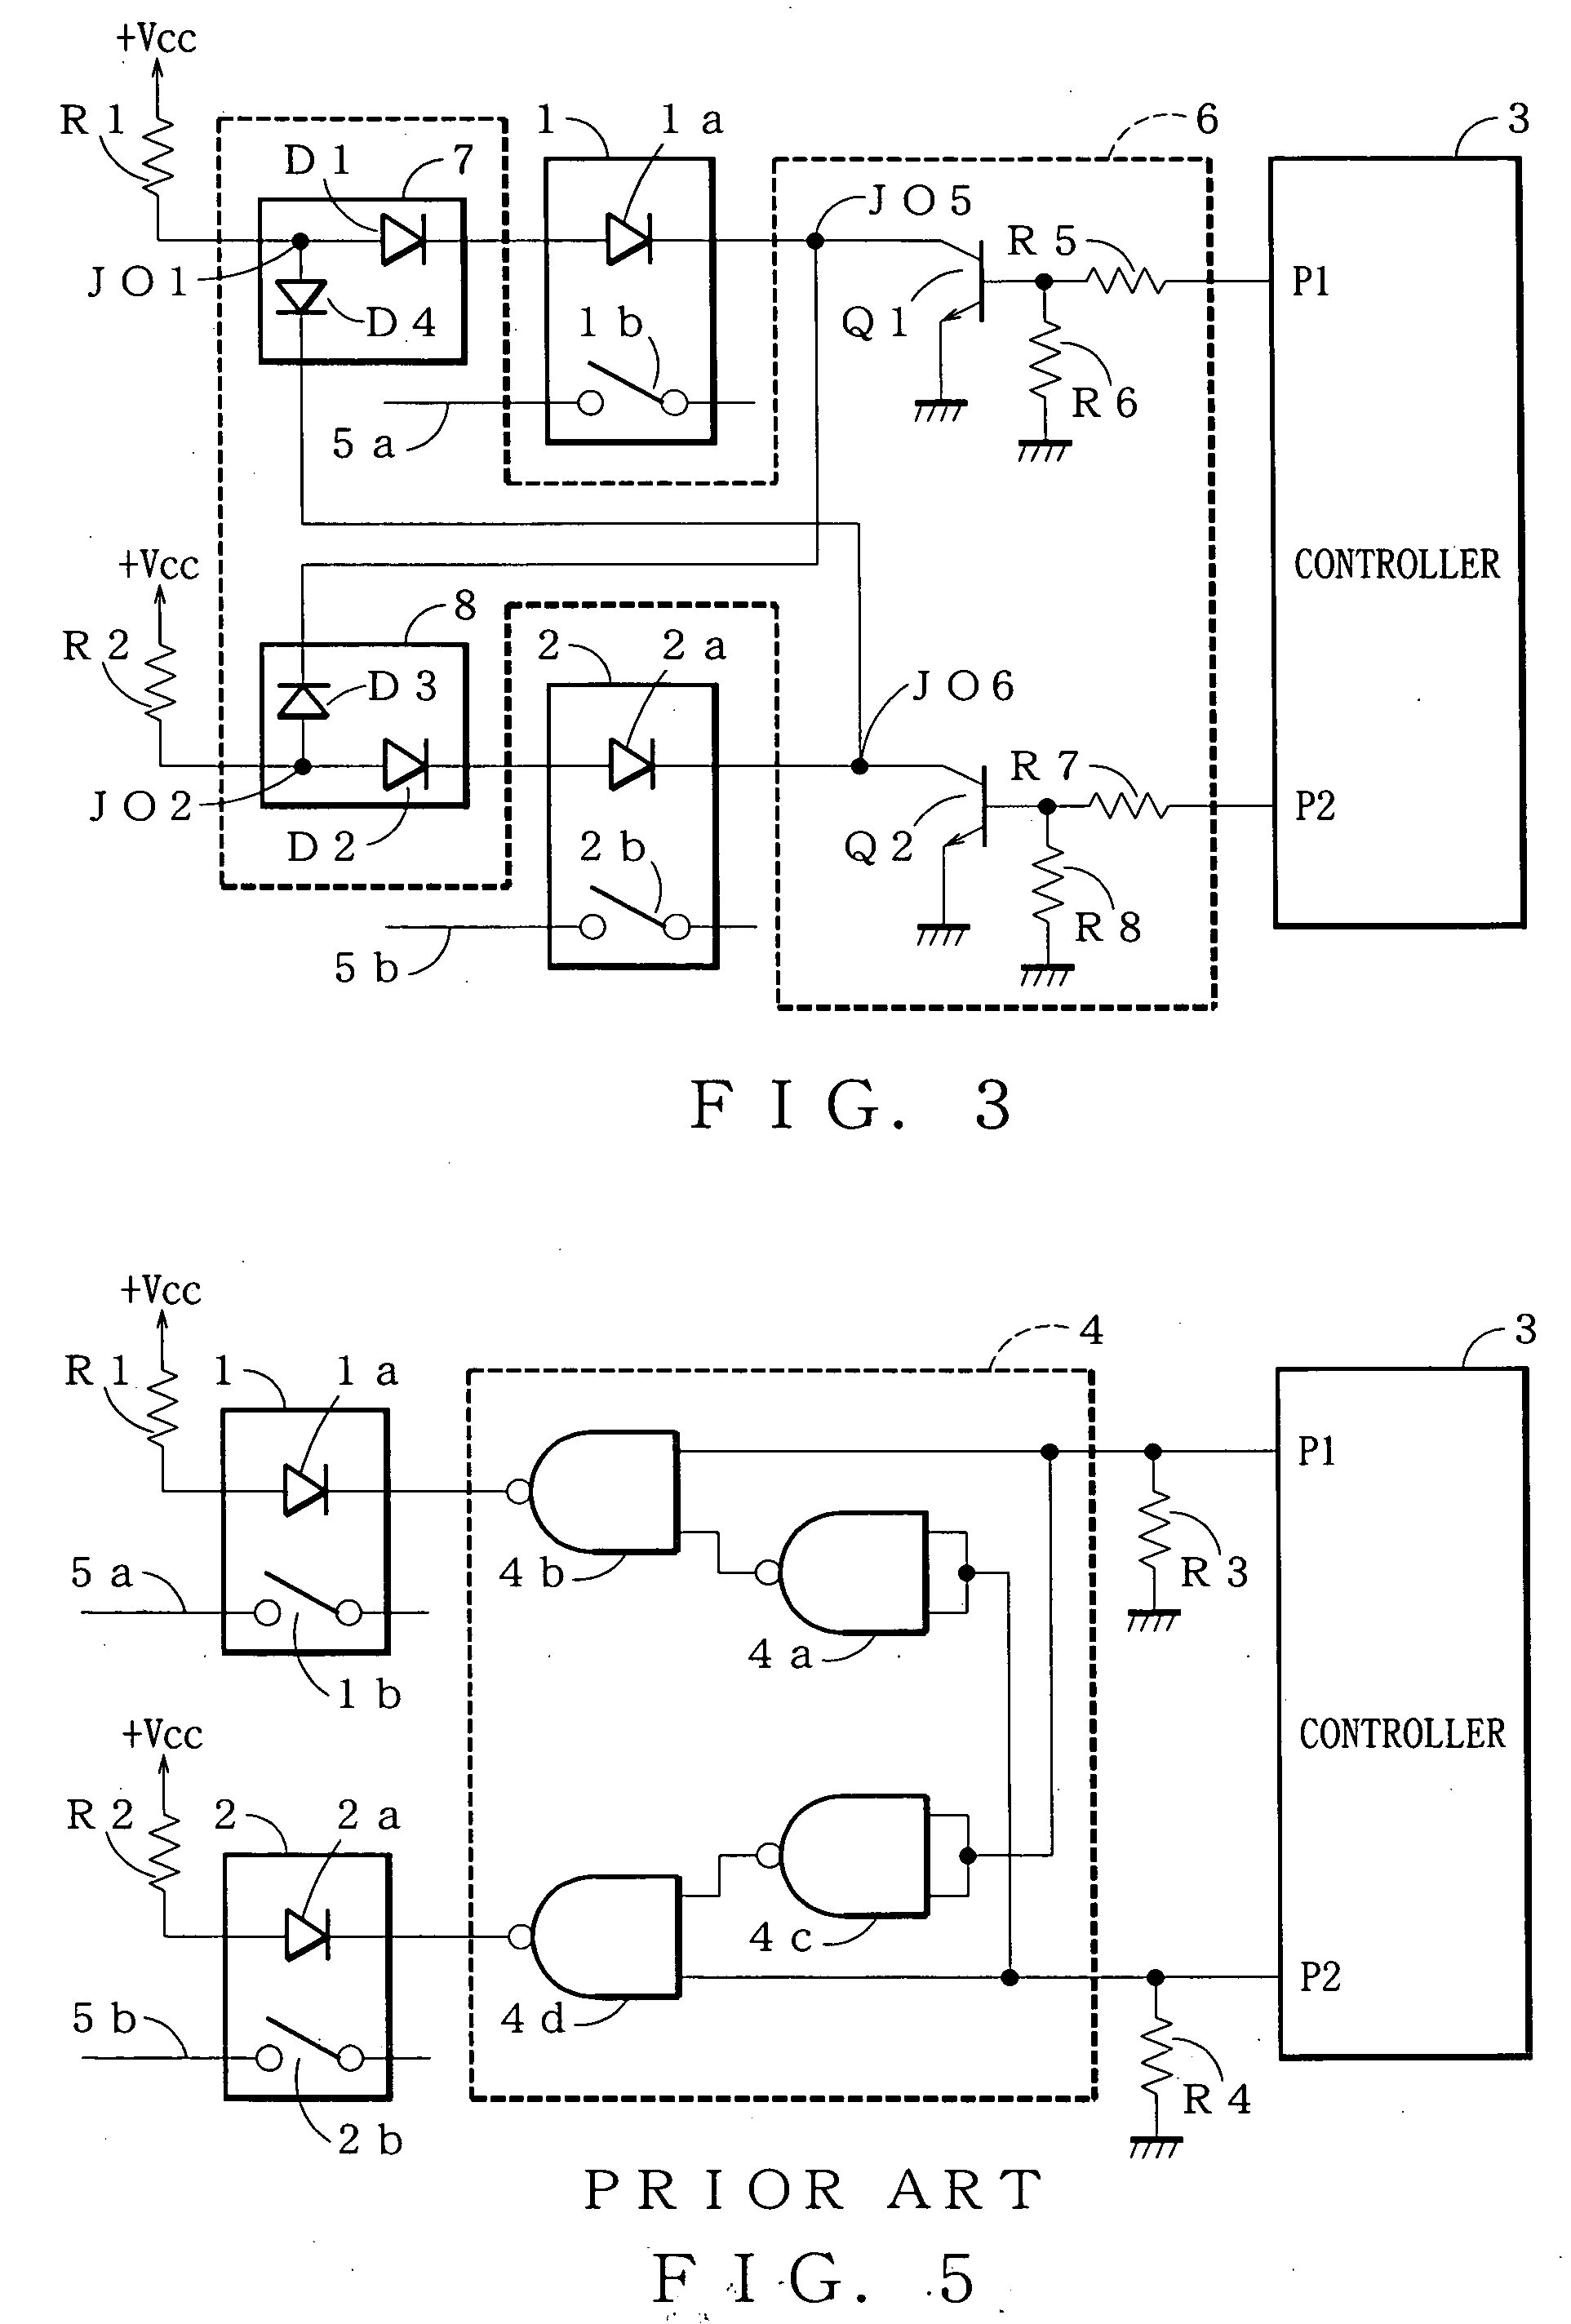 Circuit for preventing simultaneous on operations